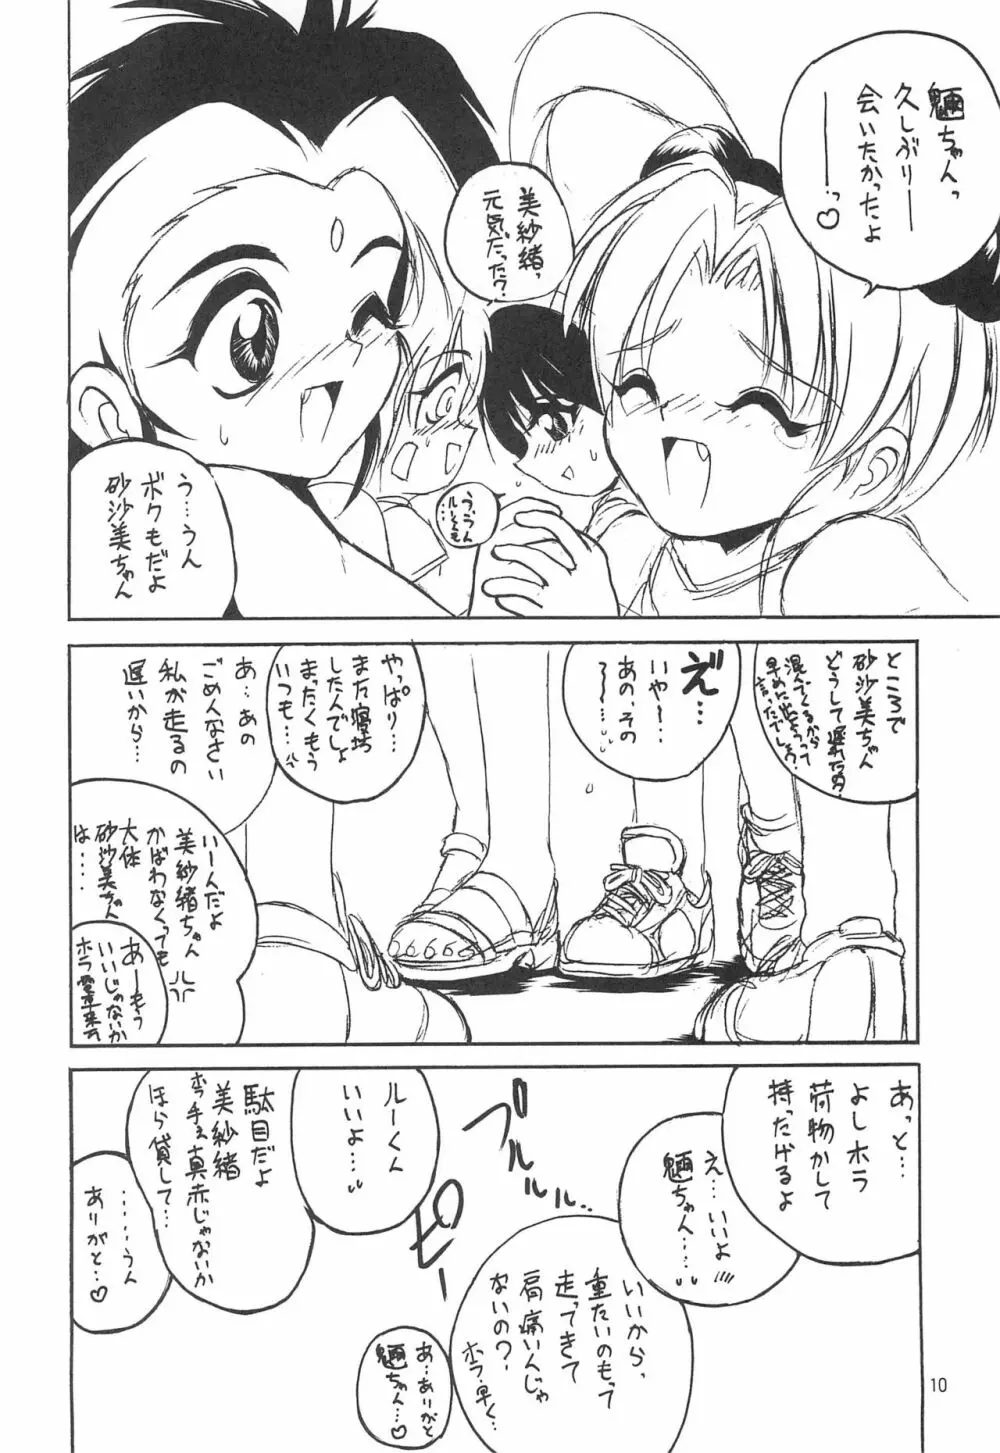 With Page.10